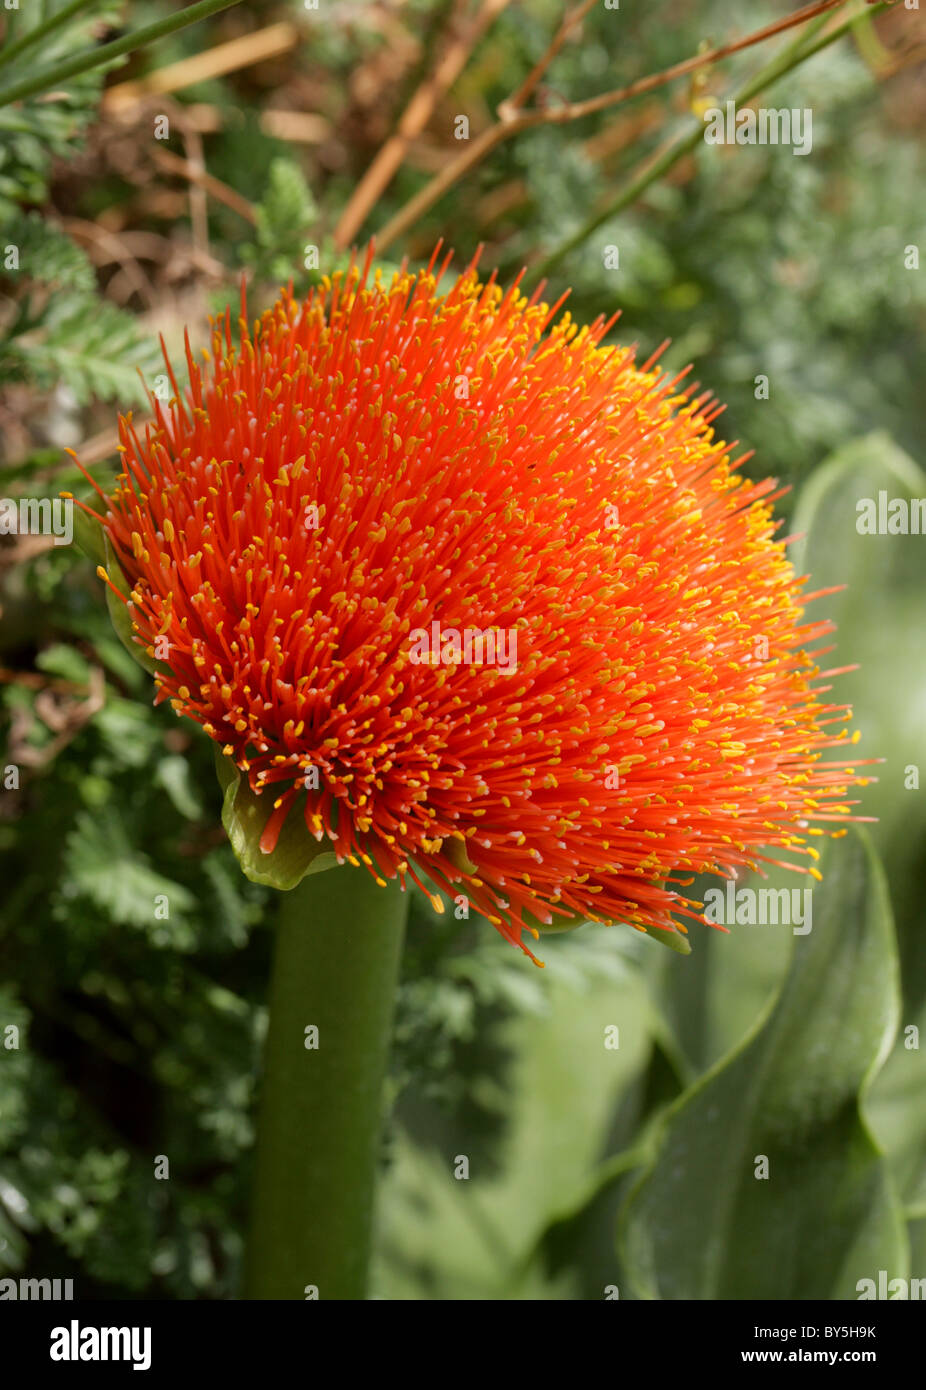 Blood Lily, Royal Lily, Snake Lily or Paintbrush Lily, Scadoxus puniceus, Haemanthus puniceus, Amaryllidaceae, Southern Africa. Stock Photo